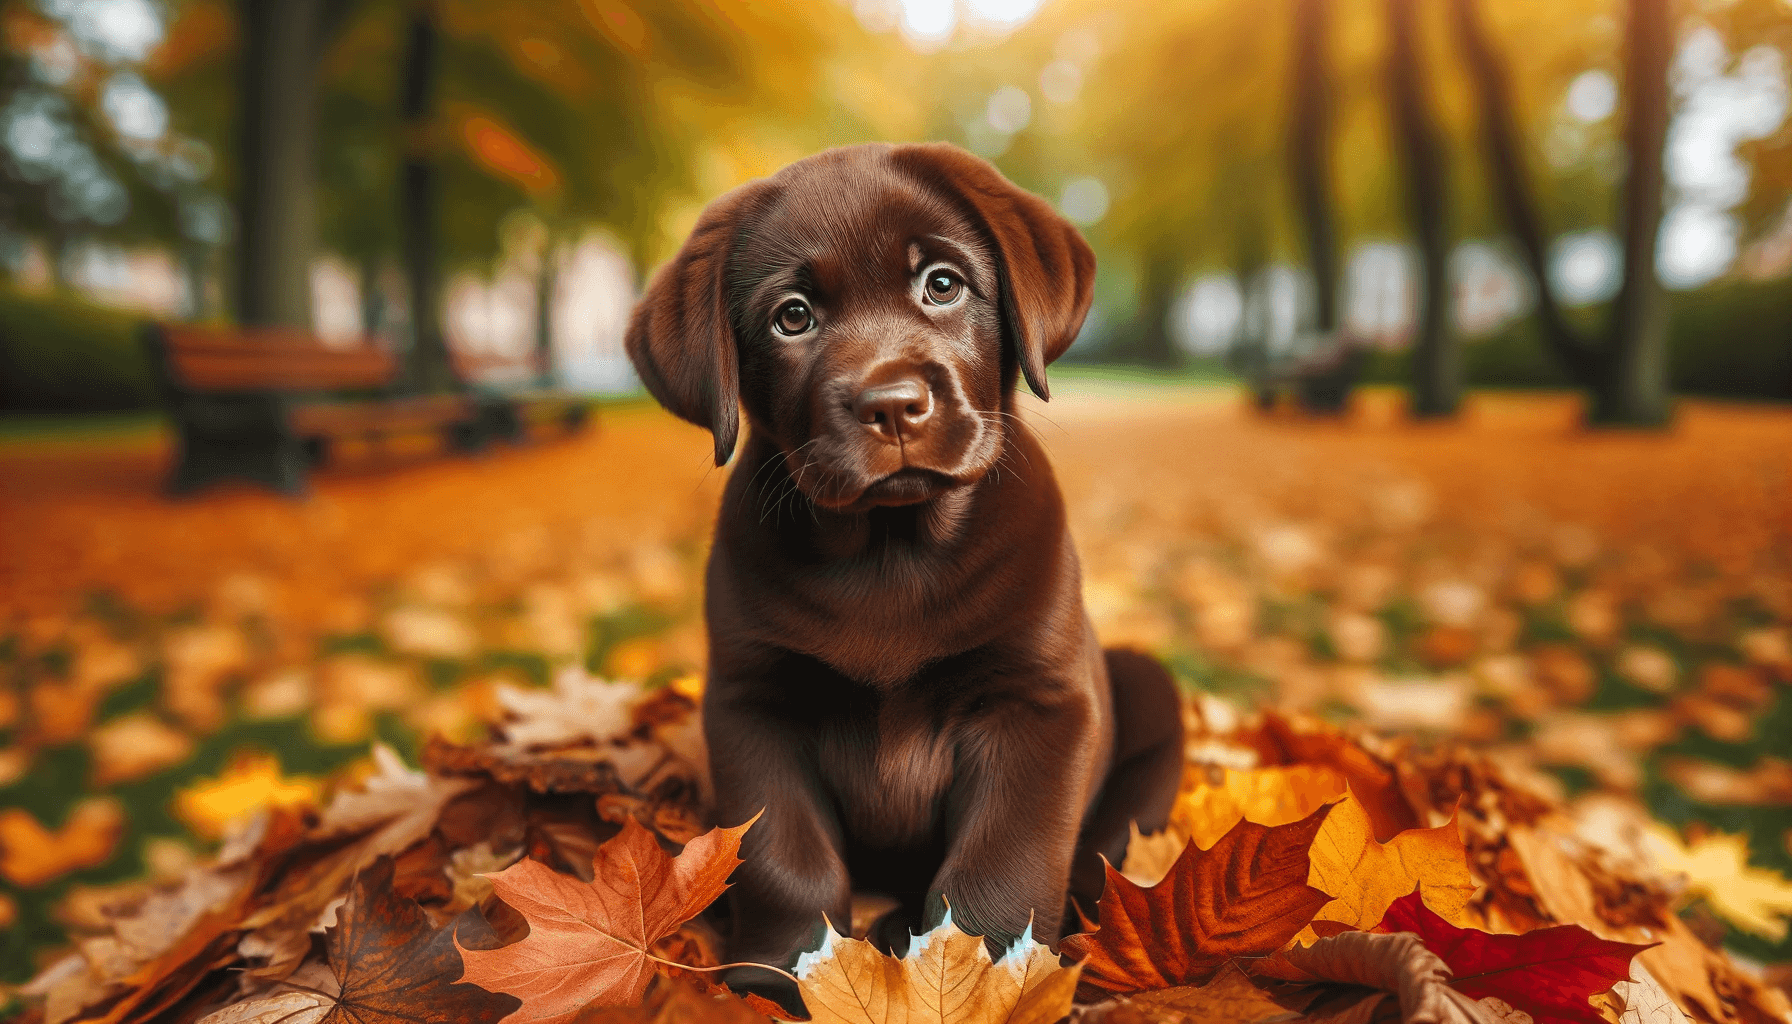 Chocolate Labrador Retriever (Labradorii) puppy sitting on a pile of autumn leaves in the park. The puppy has big expressive eyes and a shiny coat and is looking adorable.